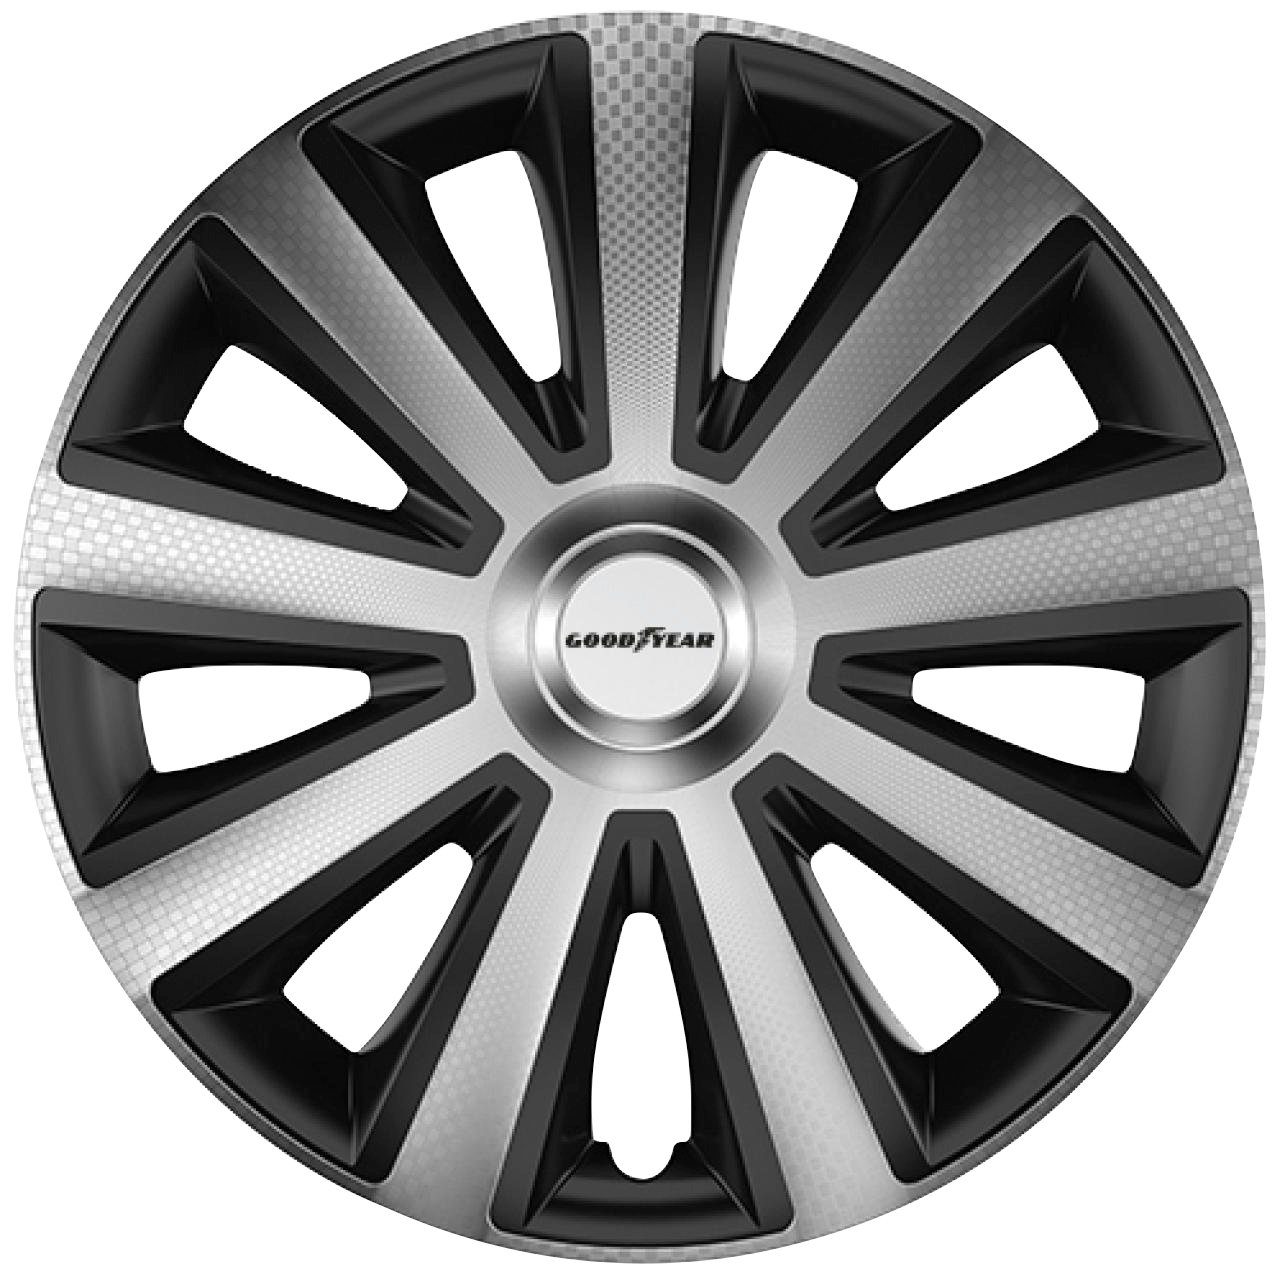 Goodyear Radkappe 14 Zoll, 14, 4-St) in Memphis (Set, Carbon